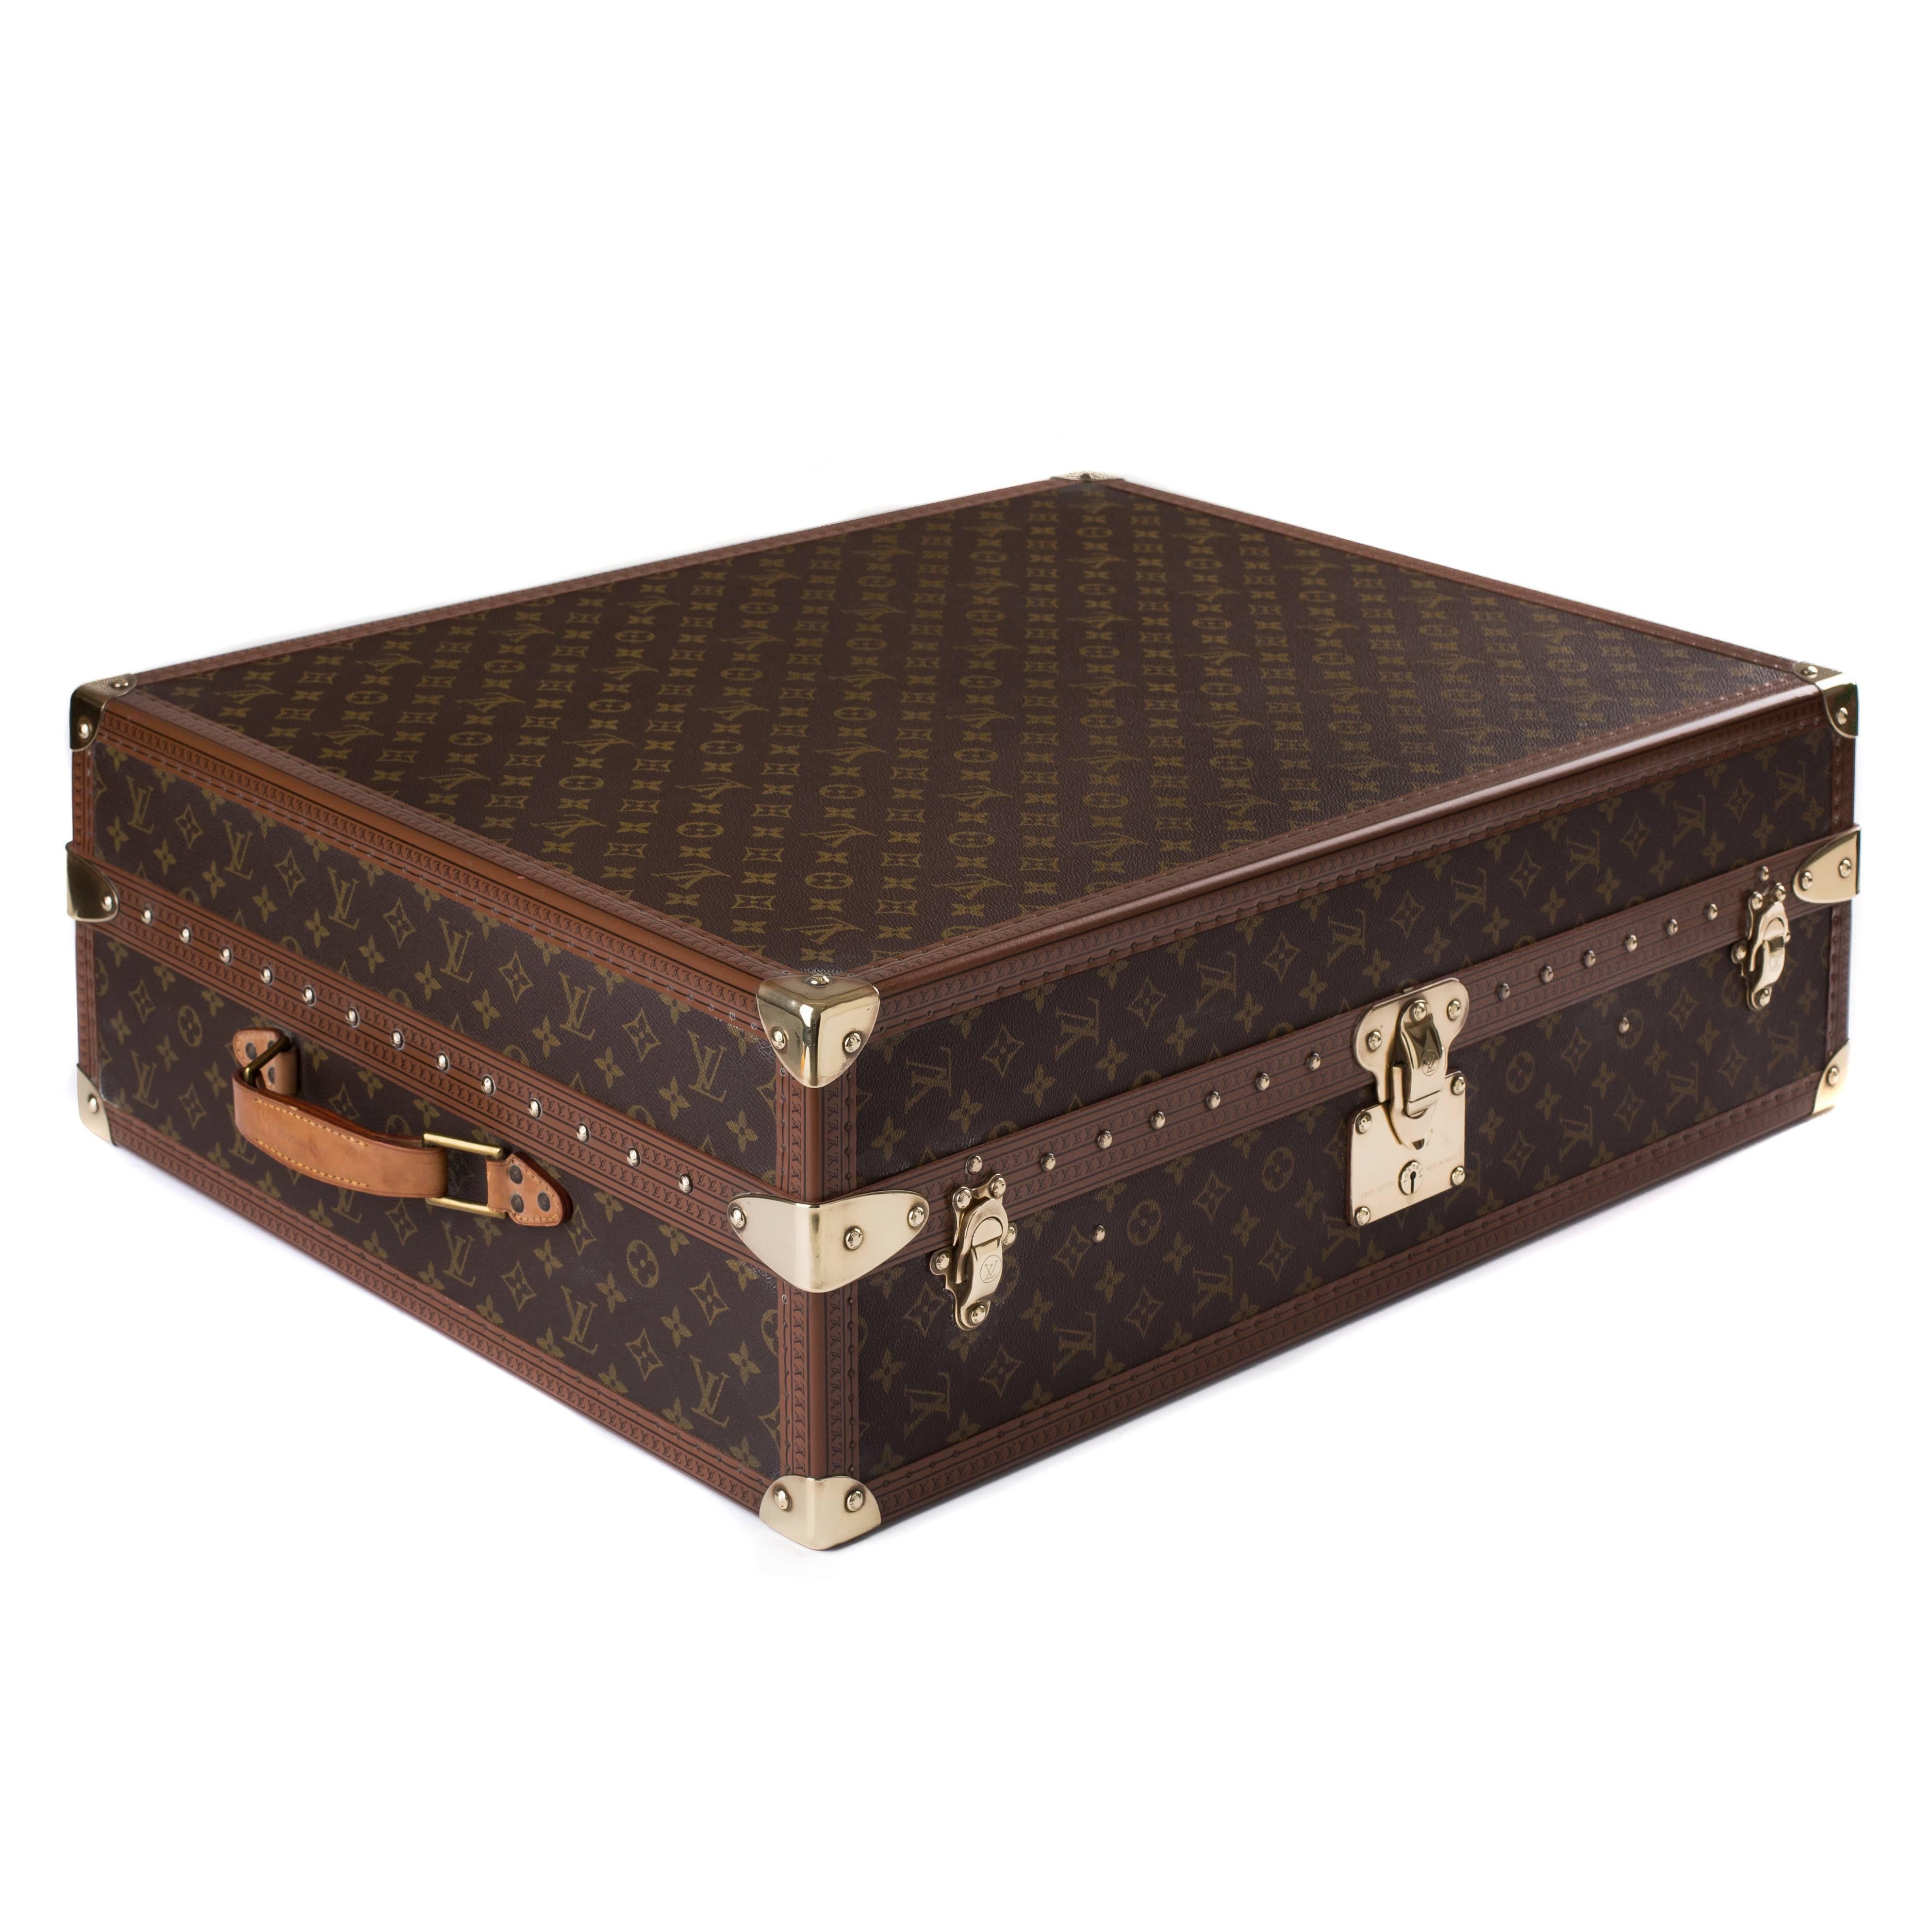 Louis Vuitton monogram shoe case with brass hardware. This functional case has space to hold 12 individual pairs of shoes, six pairs on each side.
The case is trimmed with brown leather cowhide embossed with the black LV logo. The external leather